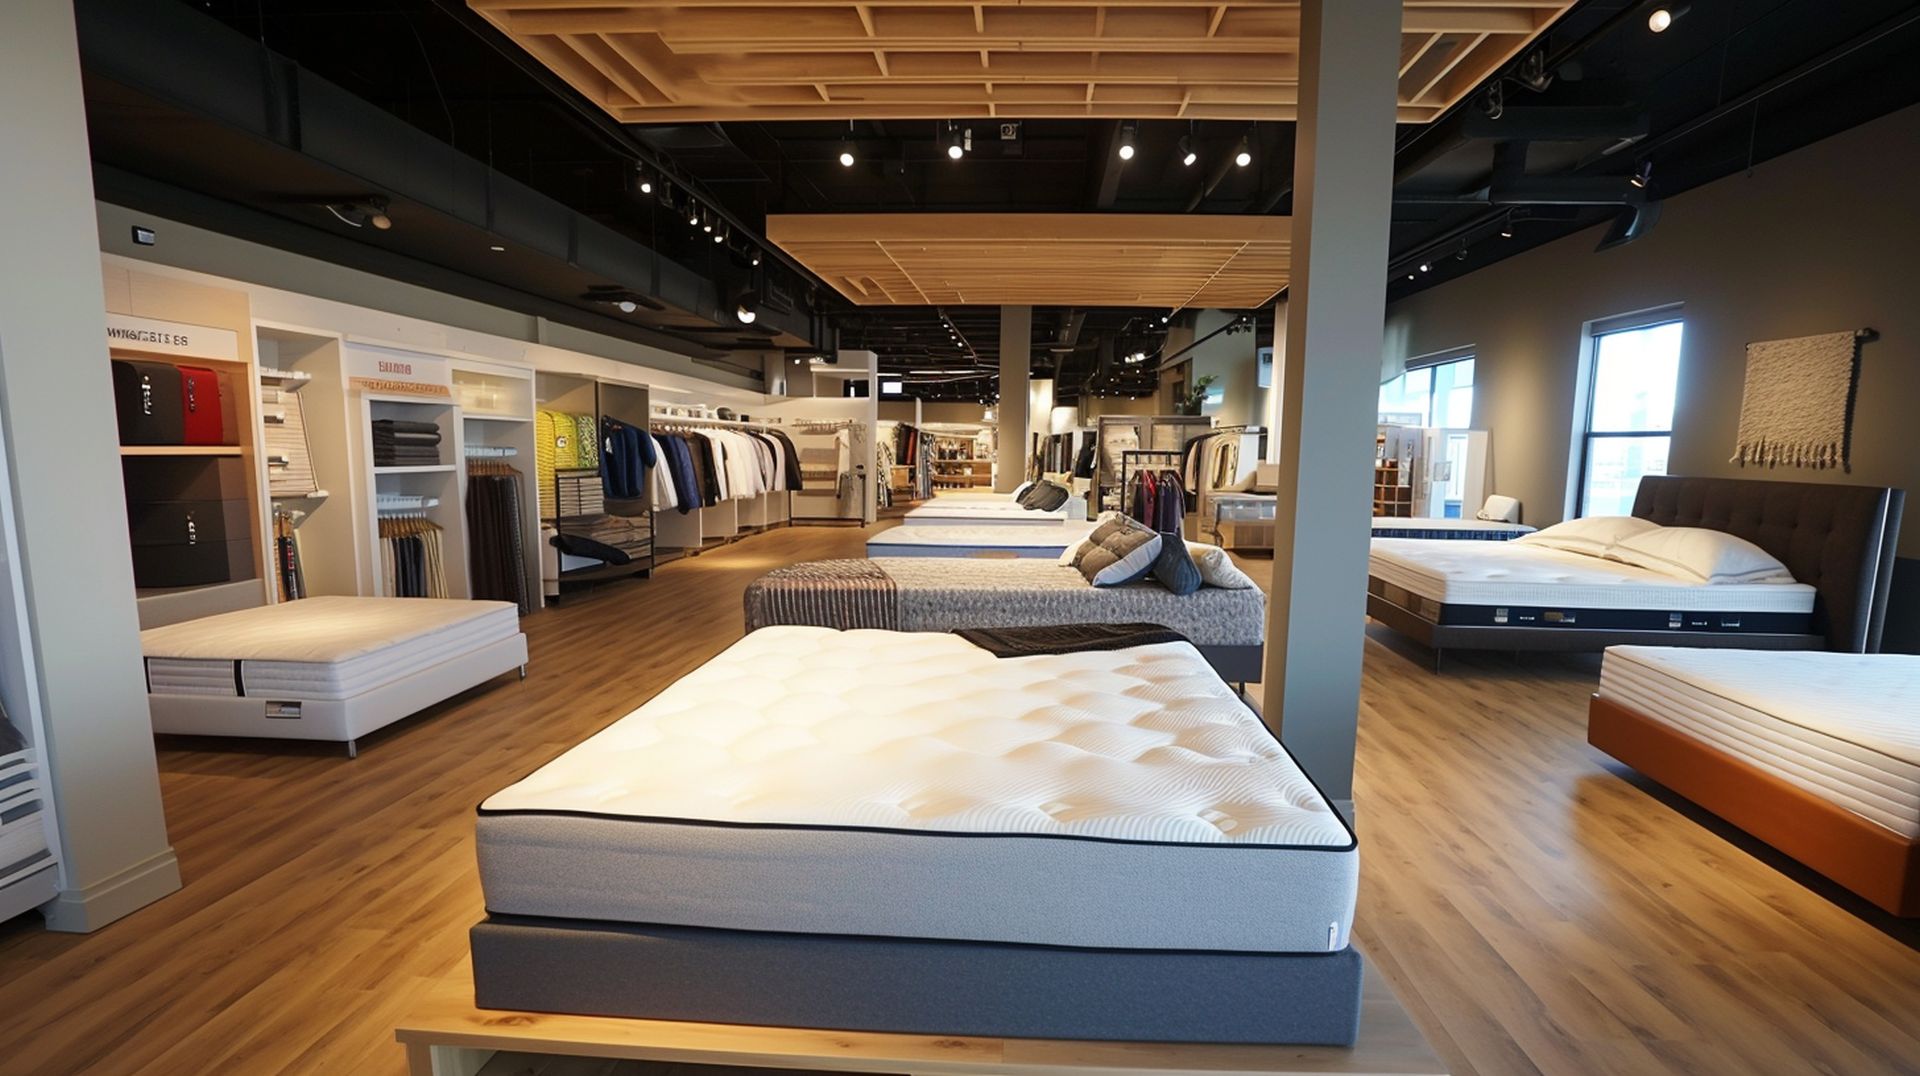 If you're looking for a new bed, mattress stores in Waukegan offer the best customer and delivery service, financing, and warranties in Illinois